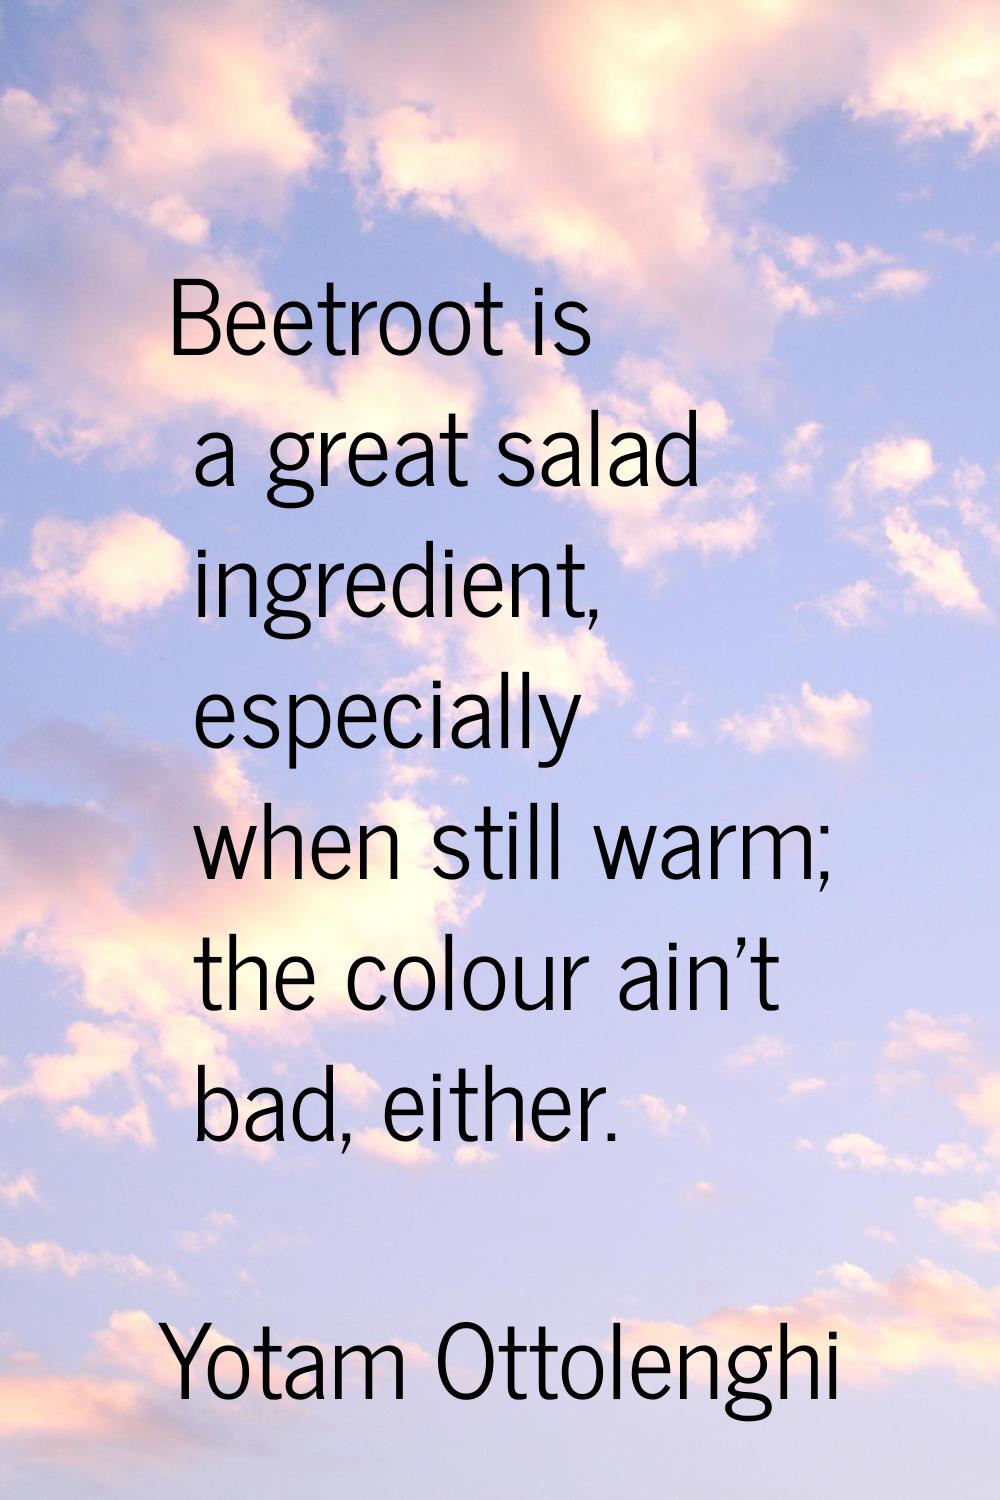 Beetroot is a great salad ingredient, especially when still warm; the colour ain't bad, either.